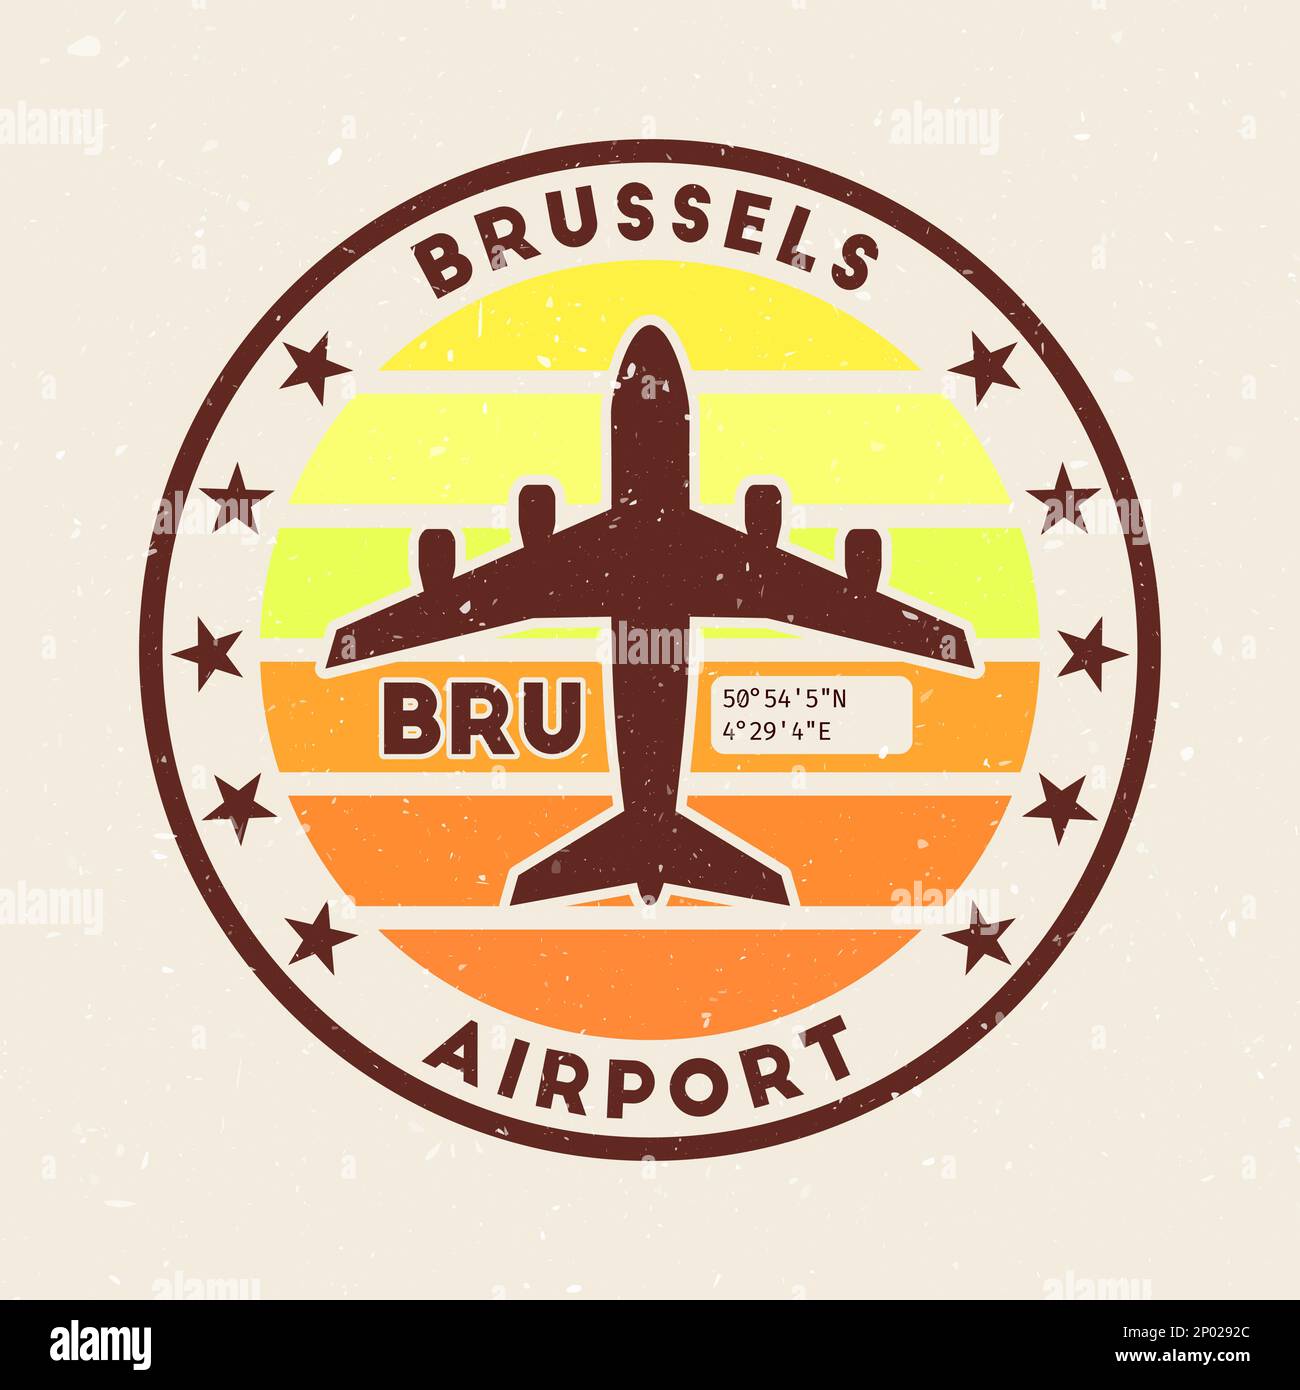 Brussels airport insignia. Round badge with vintage stripes, airplane shape, airport IATA code and GPS coordinates. Creative vector illustration. Stock Vector